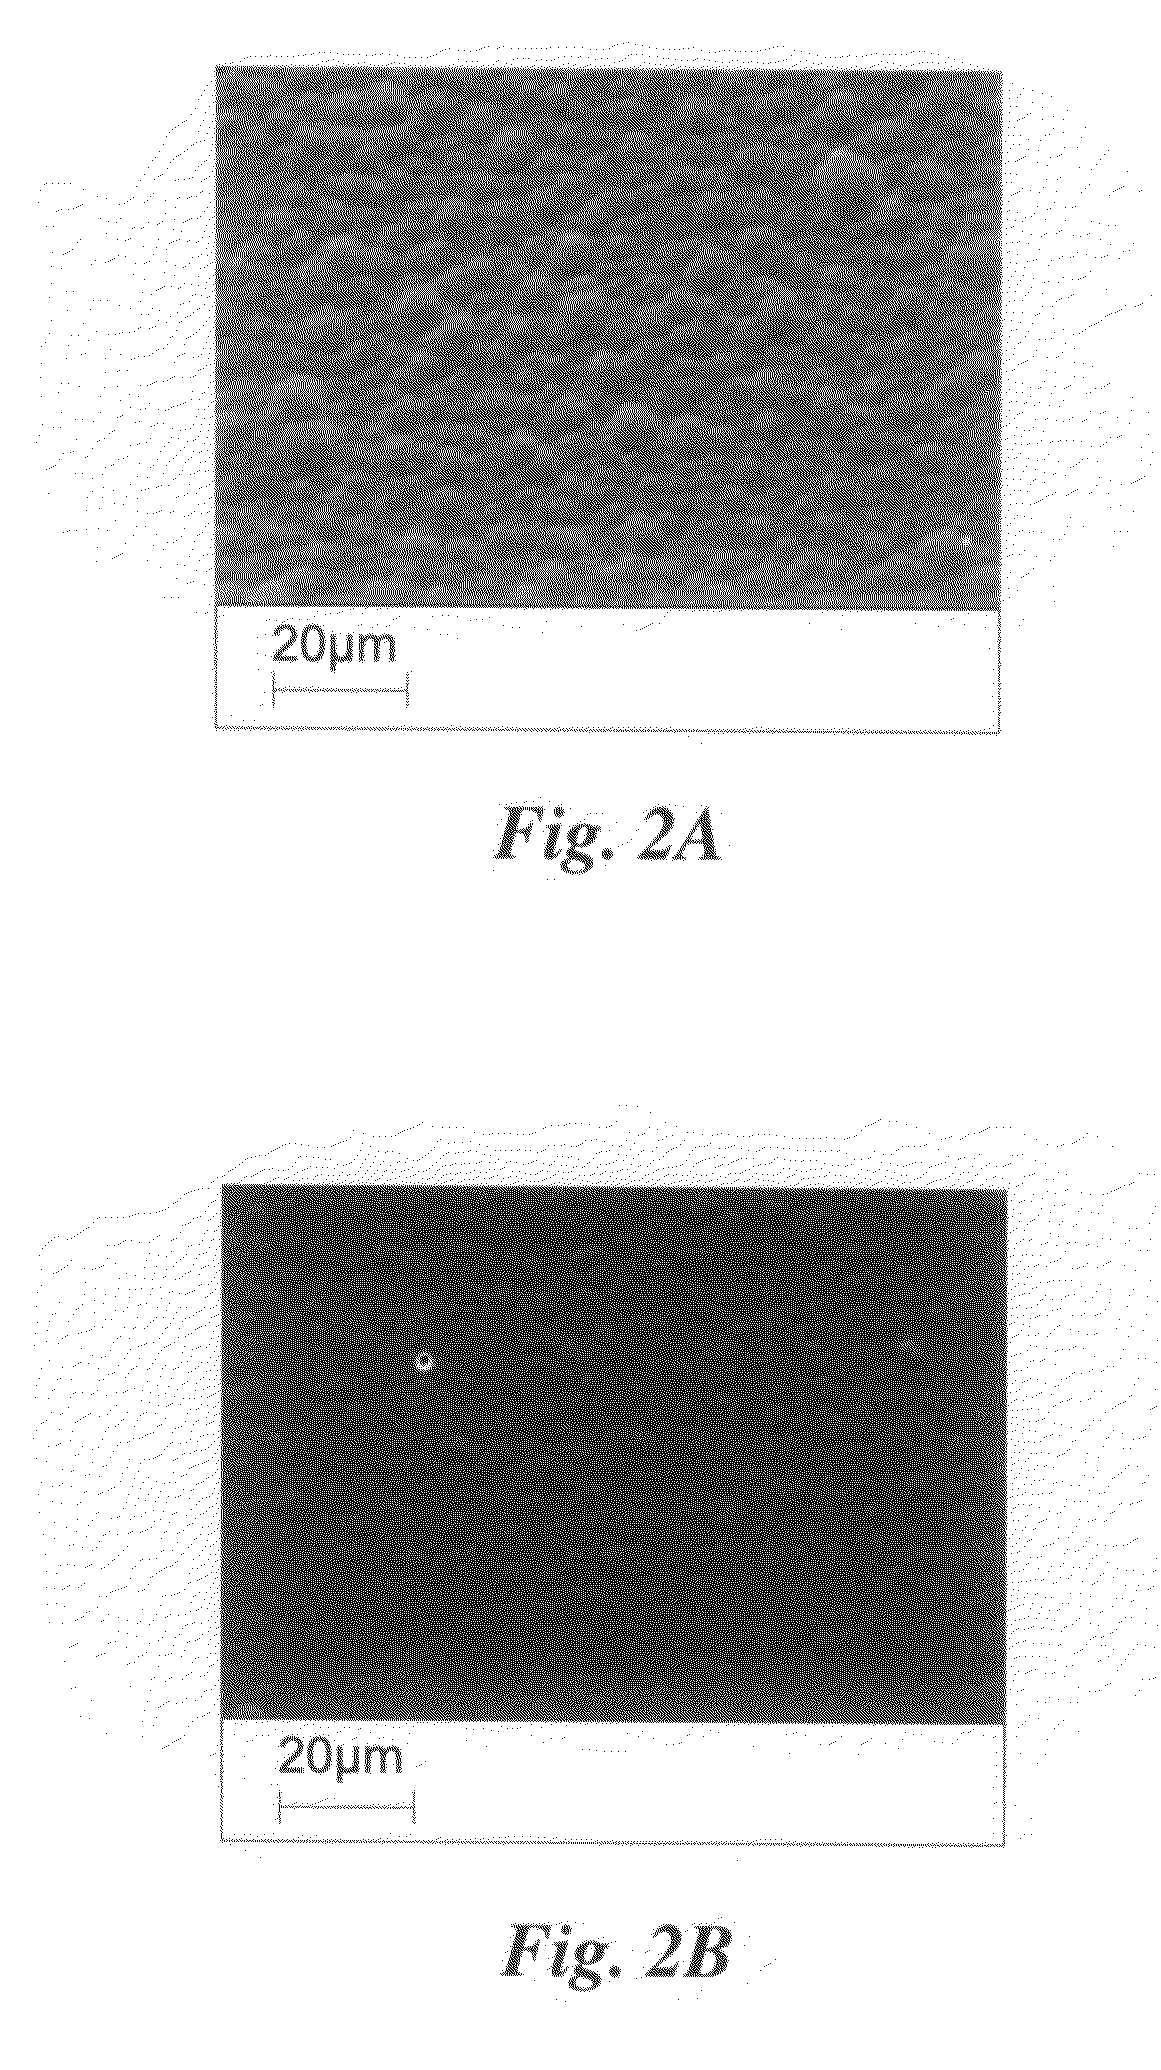 Methods for tailoring the surface topography of a nanocrystalline or amorphous metal or alloy and articles formed by such methods